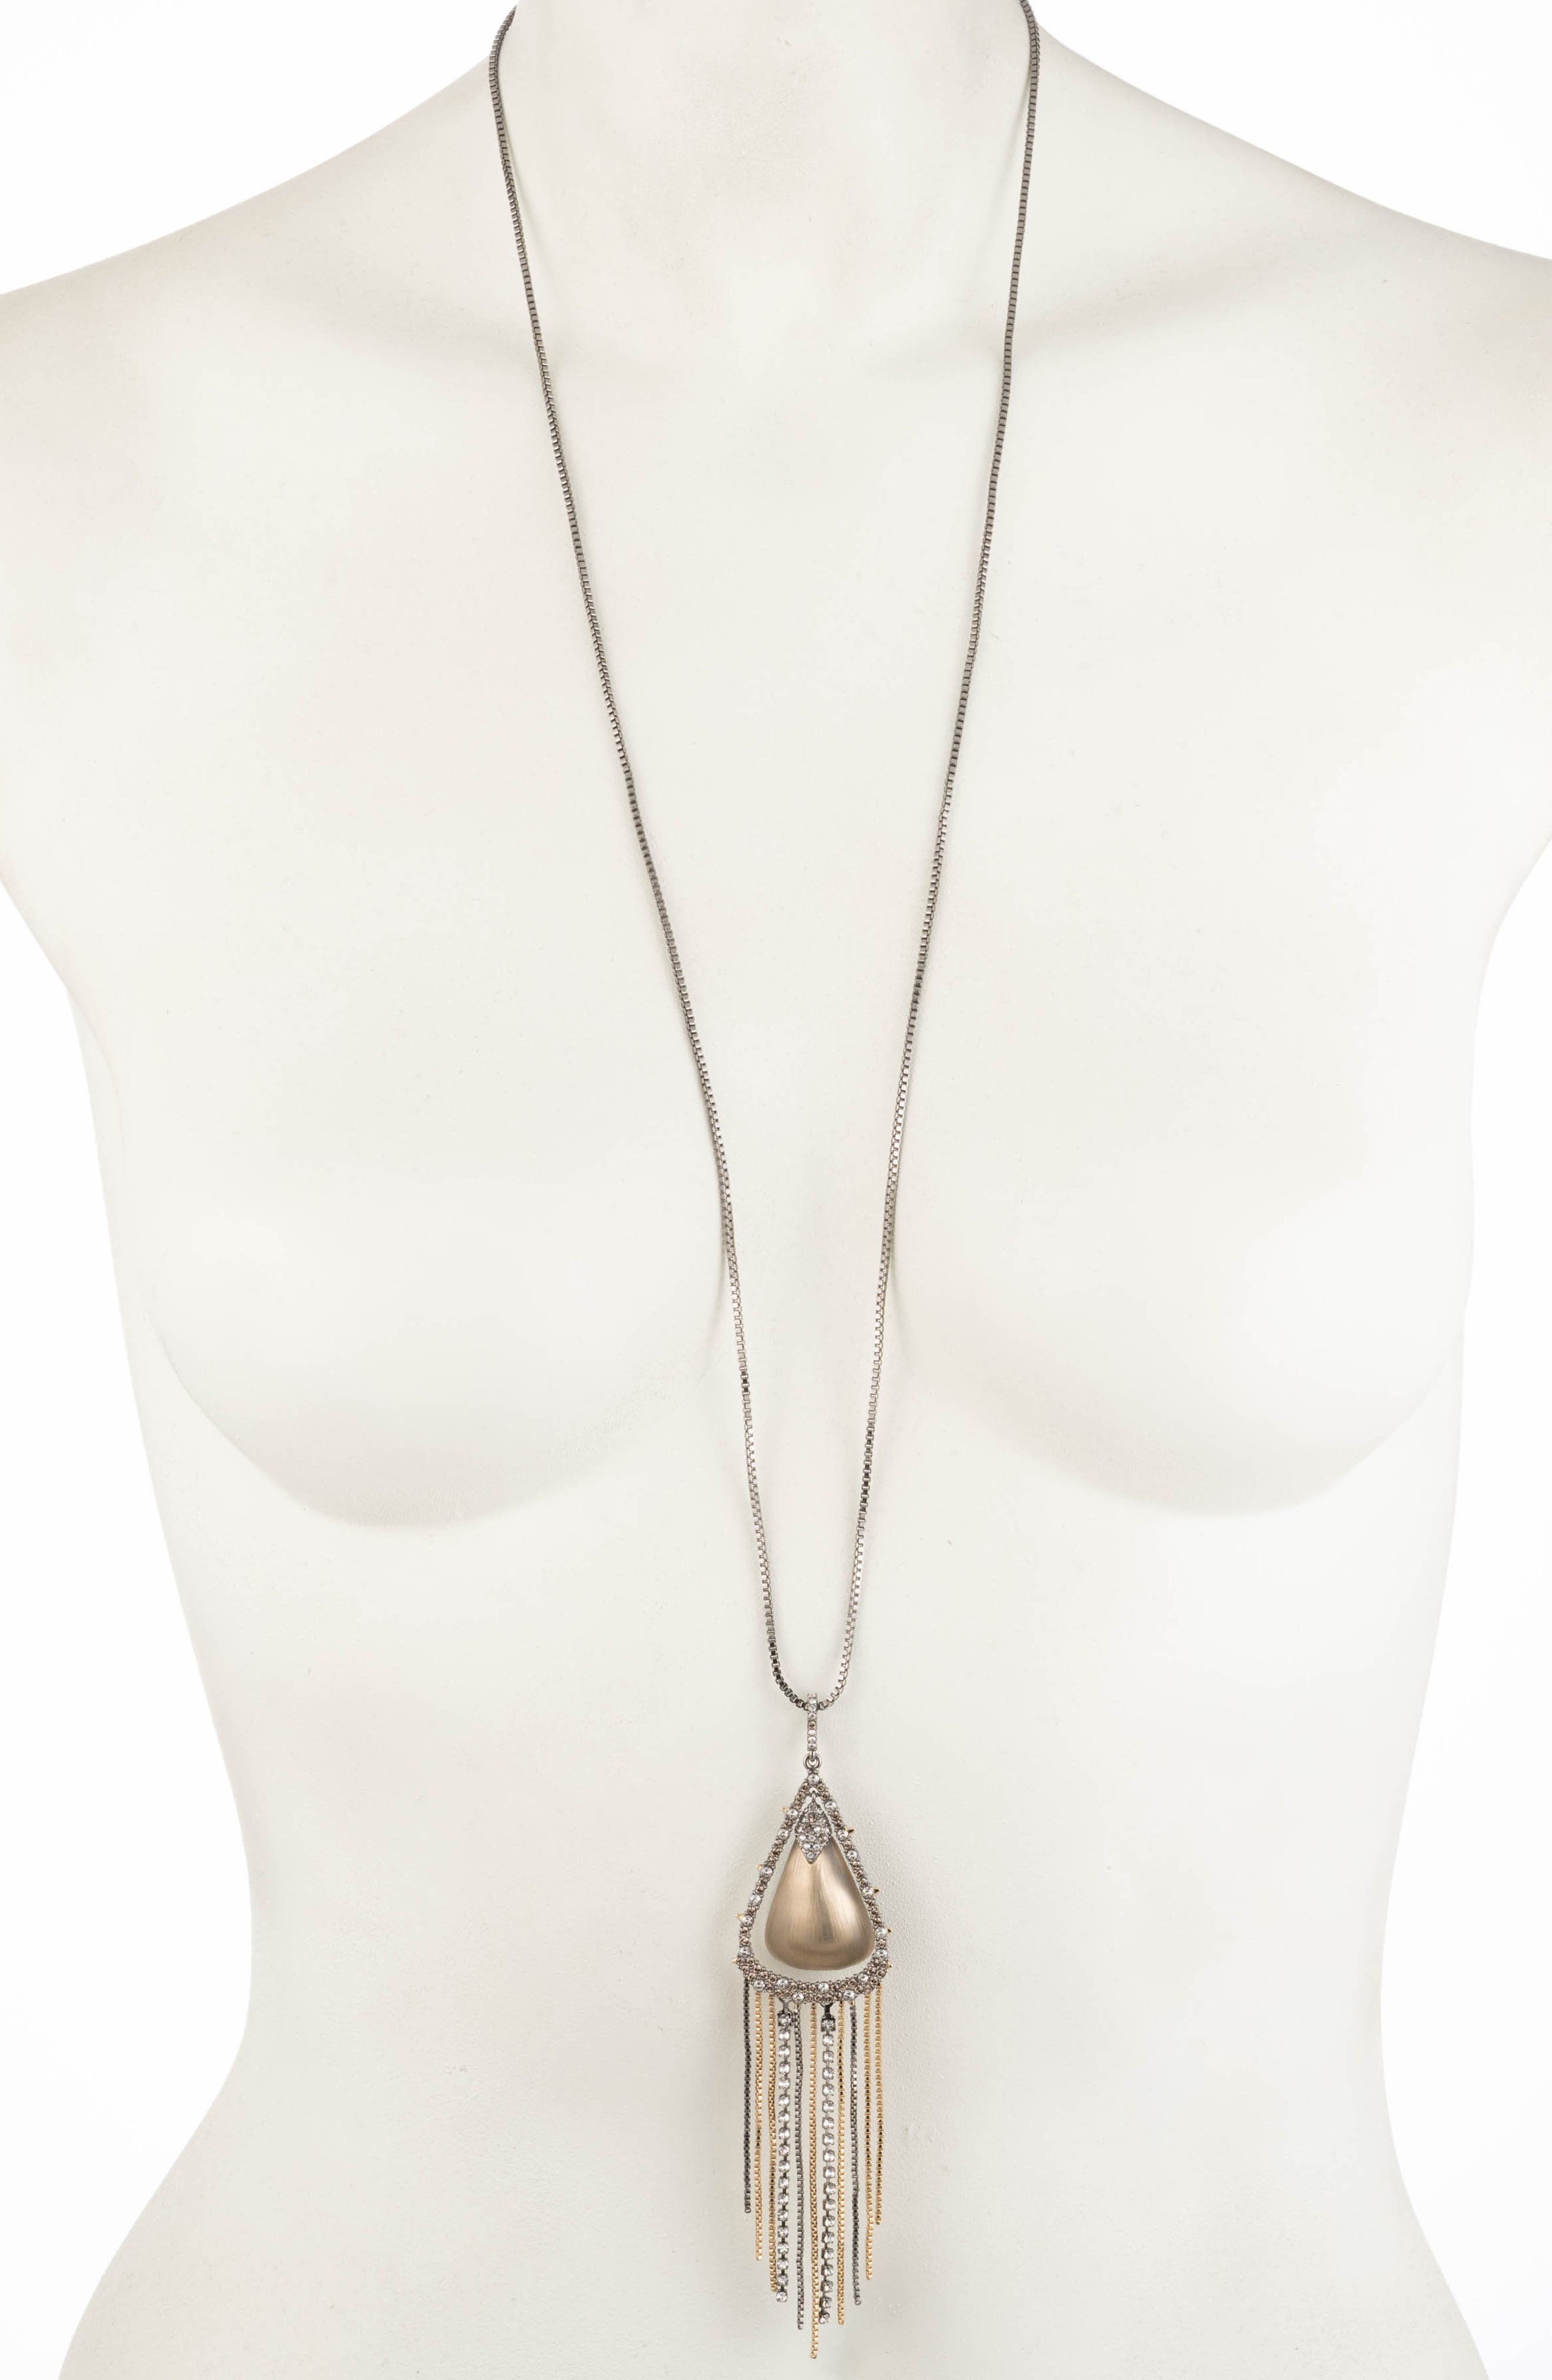 Alexis Bittar 10k Gold Plated Lucite & Crystal Tassel Drop Pendant Necklace In Warm Grey